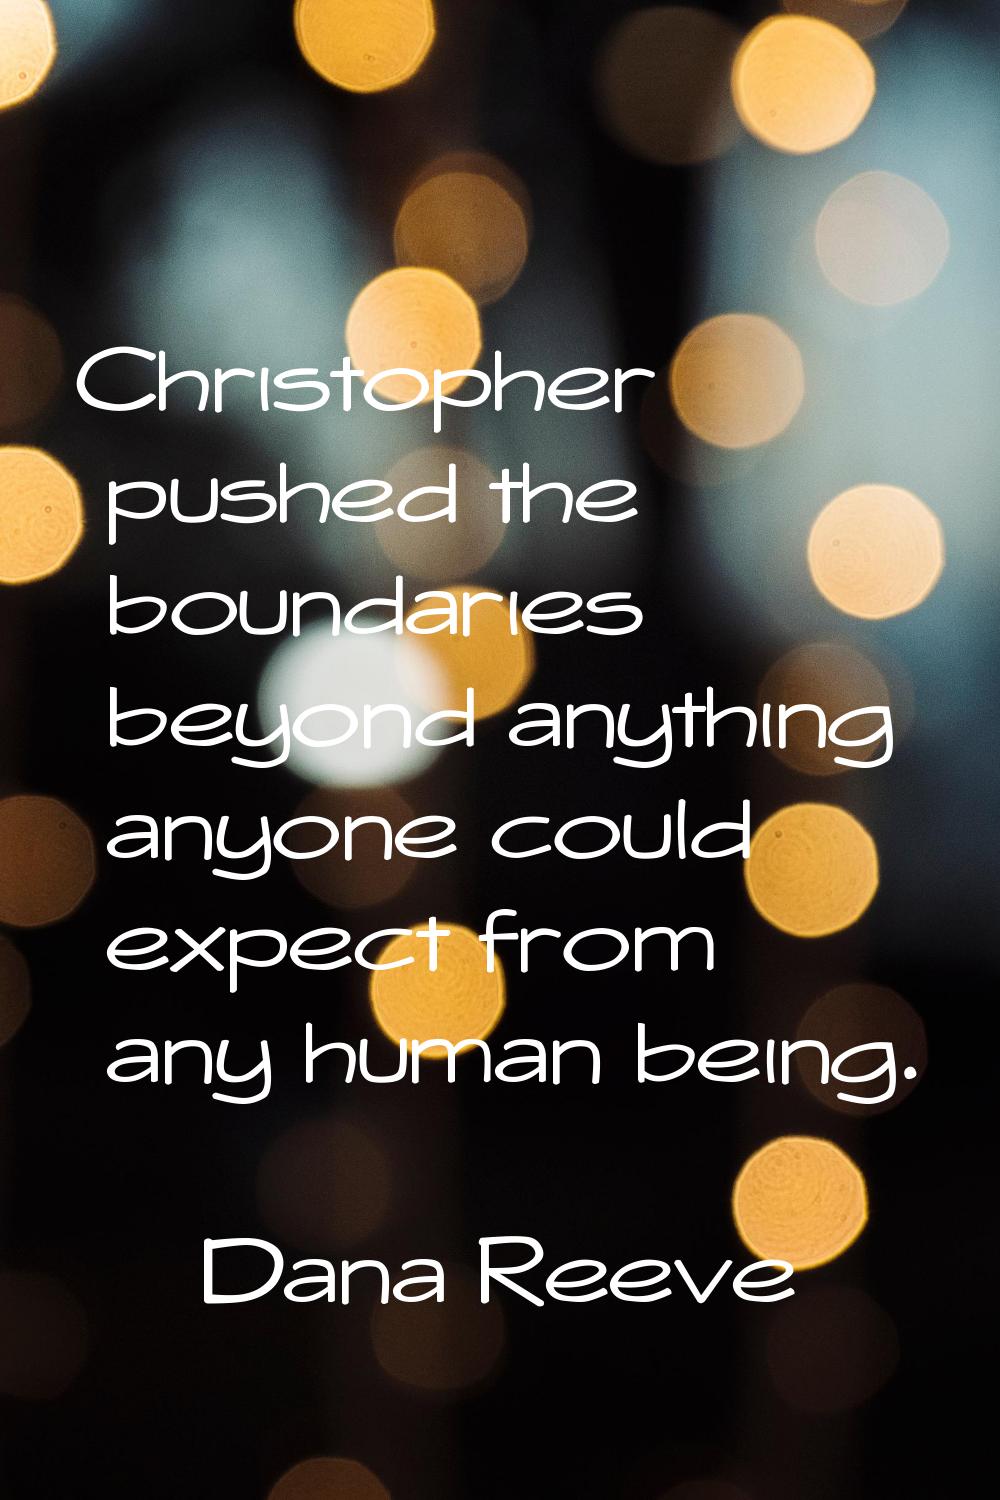 Christopher pushed the boundaries beyond anything anyone could expect from any human being.